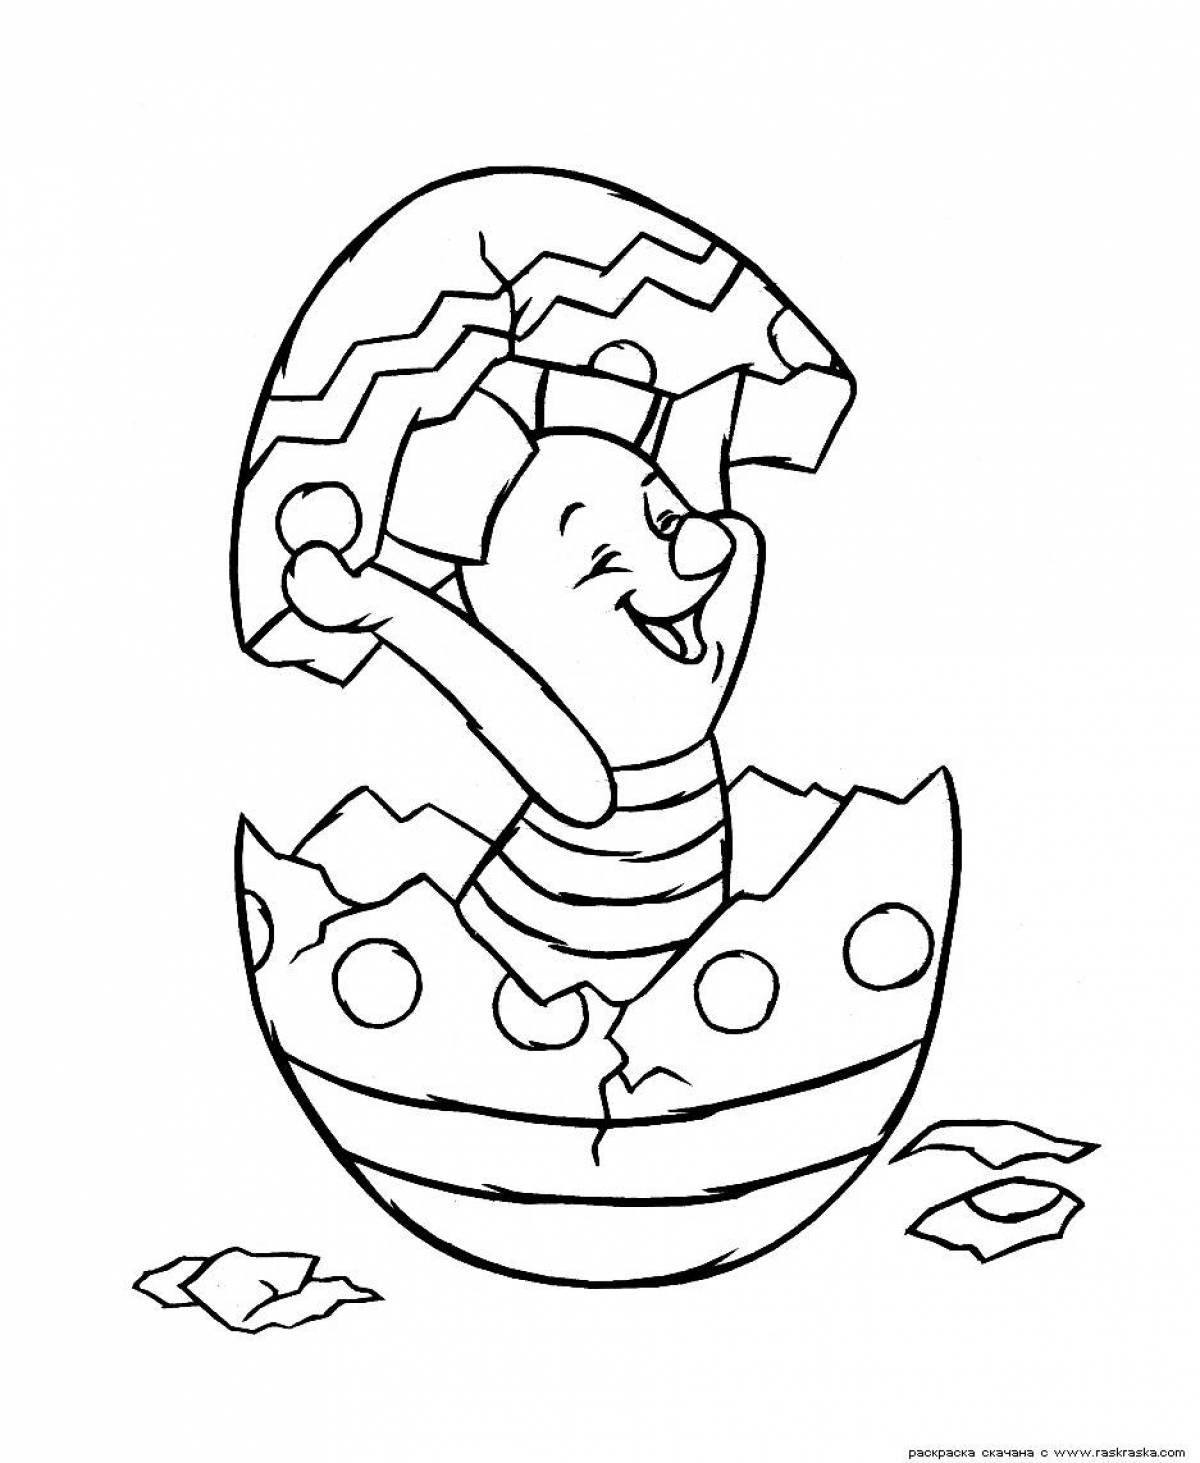 Exciting kinder coloring page